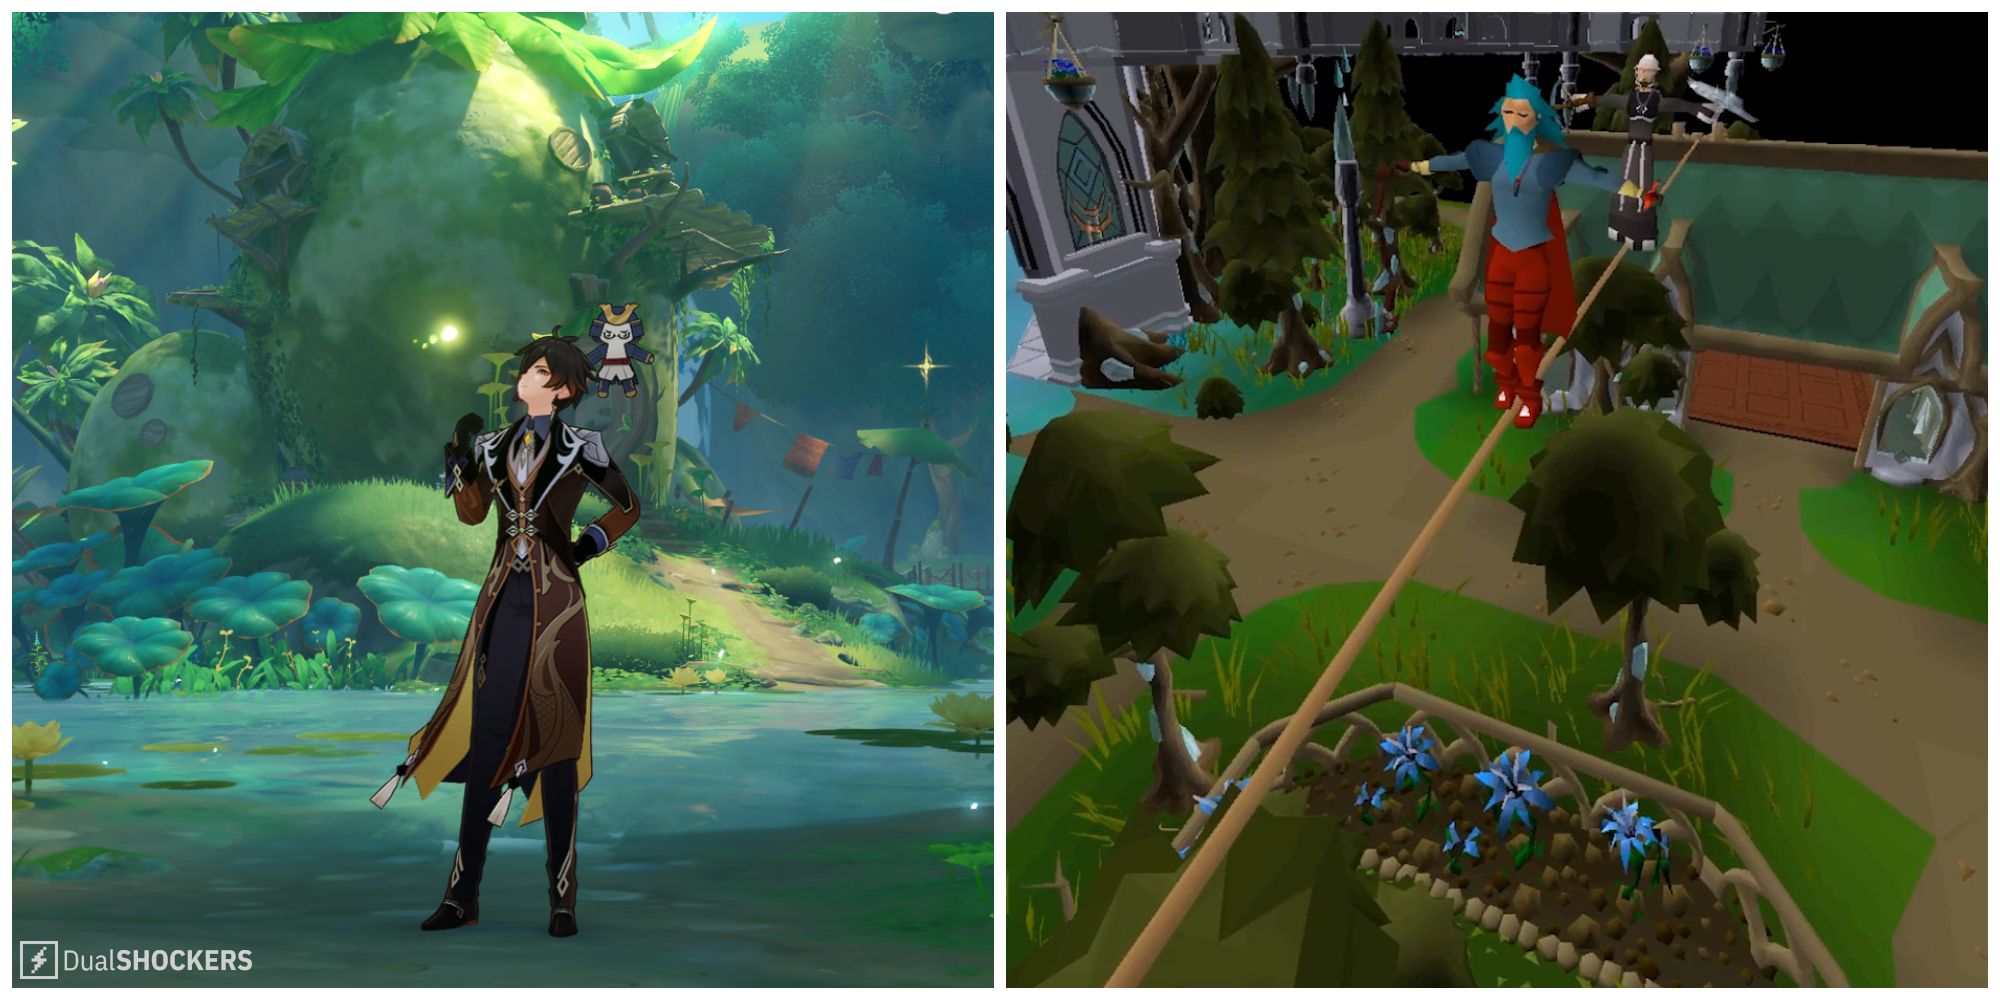 Split image of gameplay from Genshin Impact and gameplay from Old School Runescape.